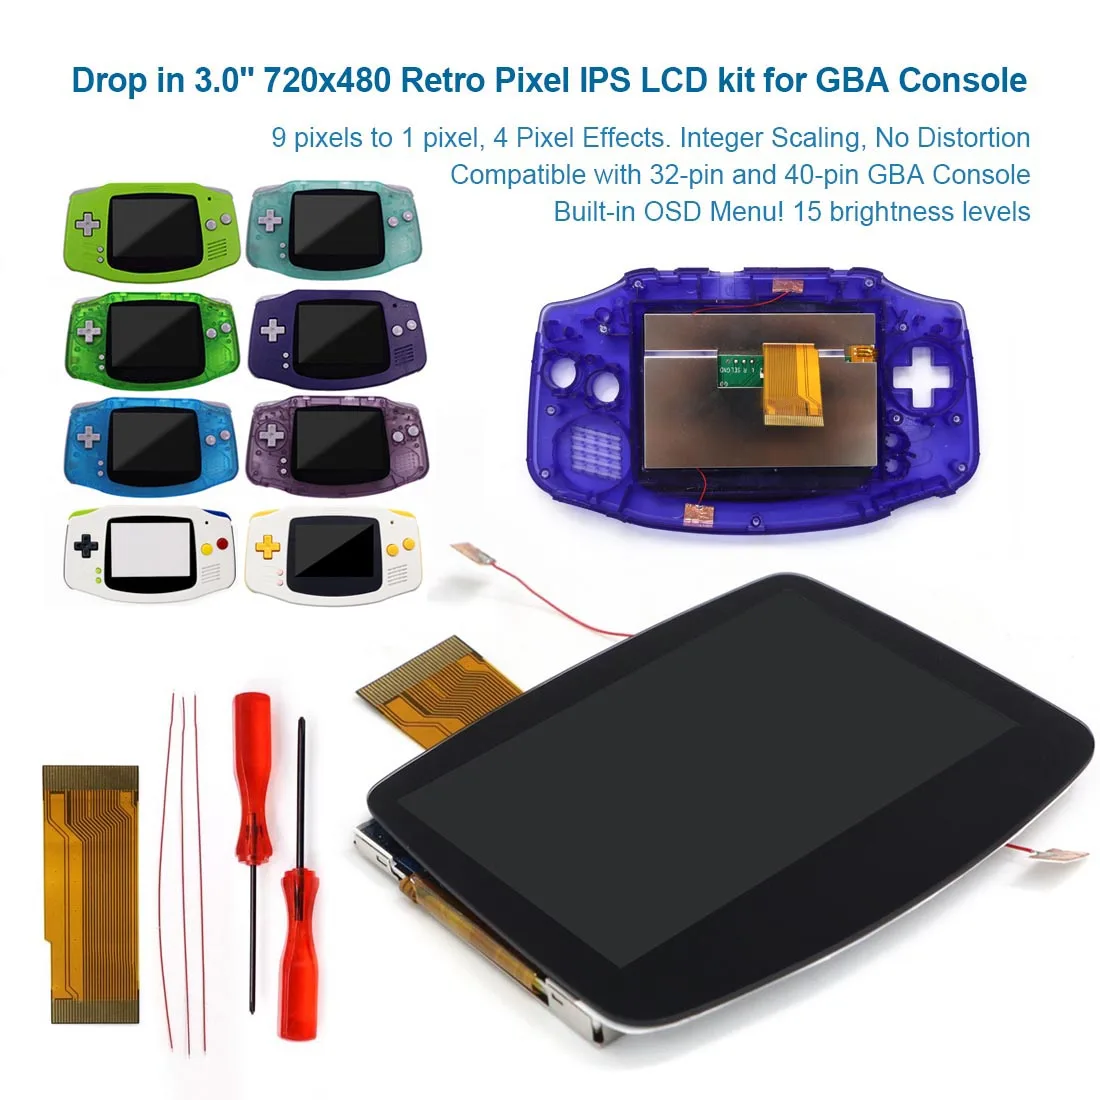 

HD V5 Laminated 720x480 Retro Pixel IPS Backlight LCD With Custom Shell For Gameboy Advance For GBA Console